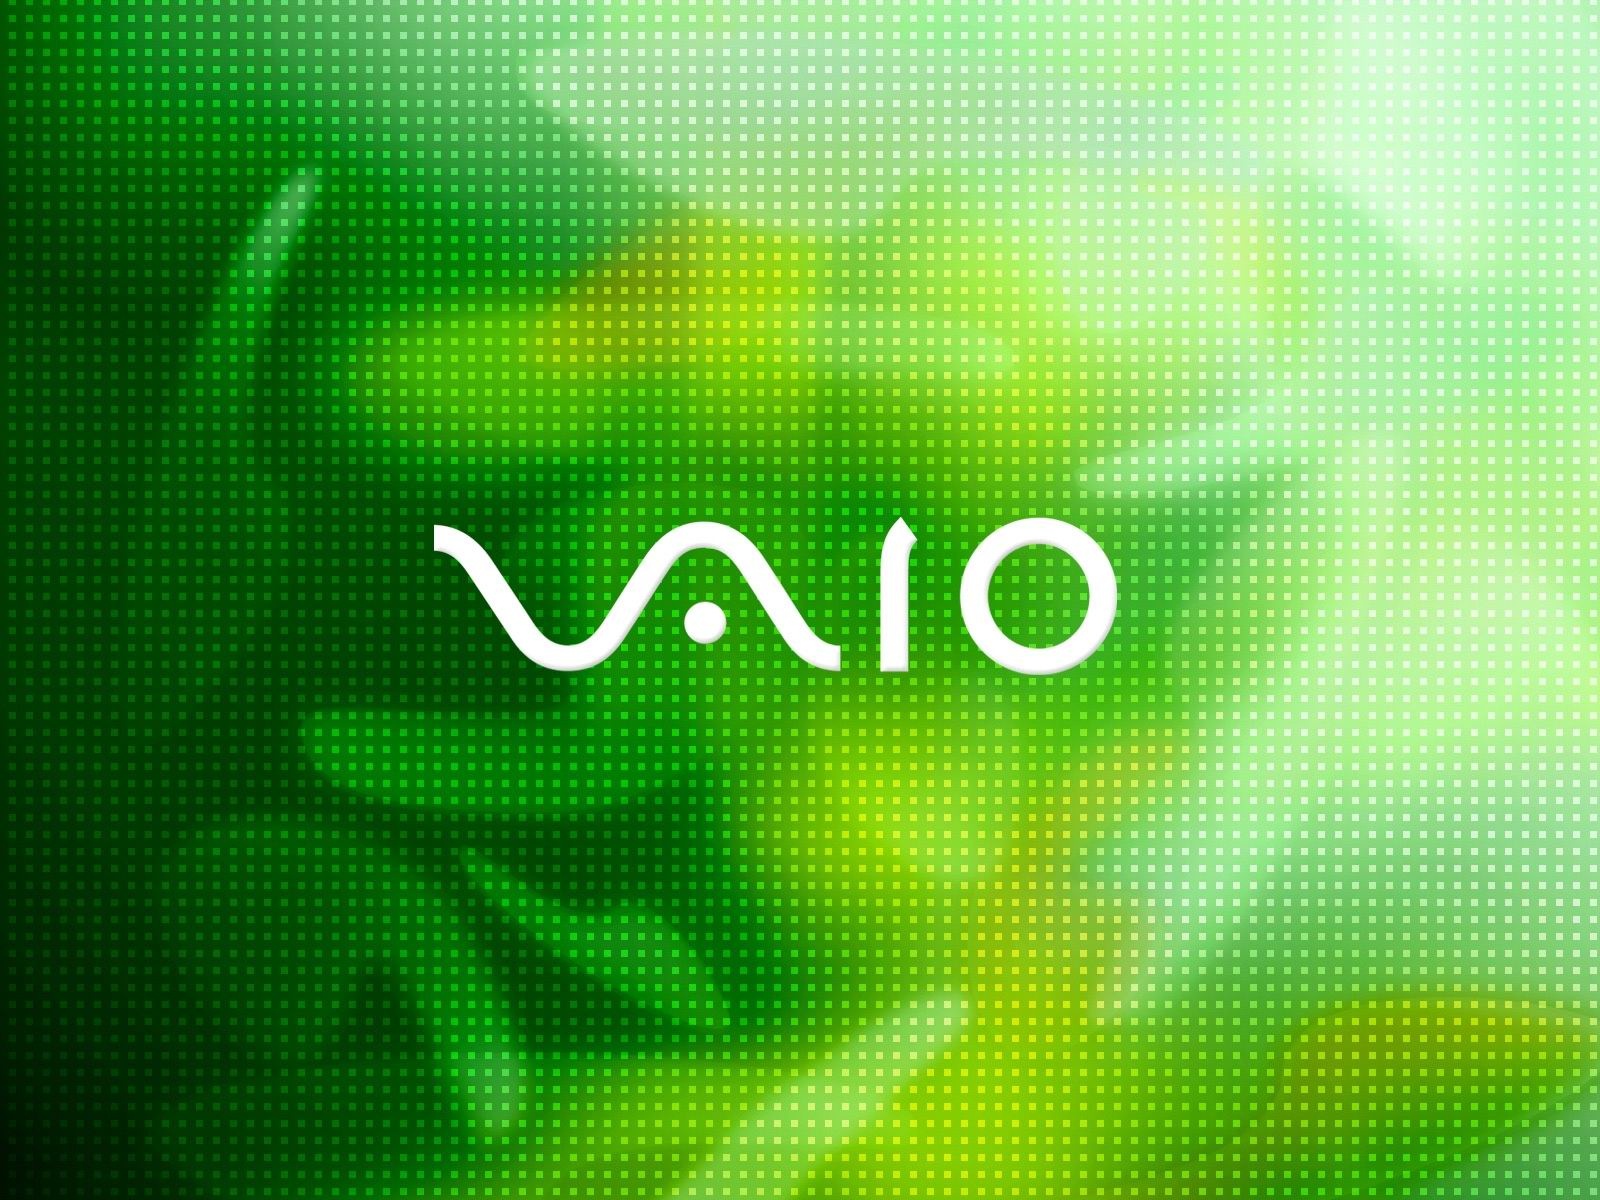 Free Download Hd Sony Vaio Wallpapers Amp Vaio Backgrounds For Download 1600x10 For Your Desktop Mobile Tablet Explore 75 Sony Vaio Wallpapers Sony Wallpaper Xperia Wallpaper